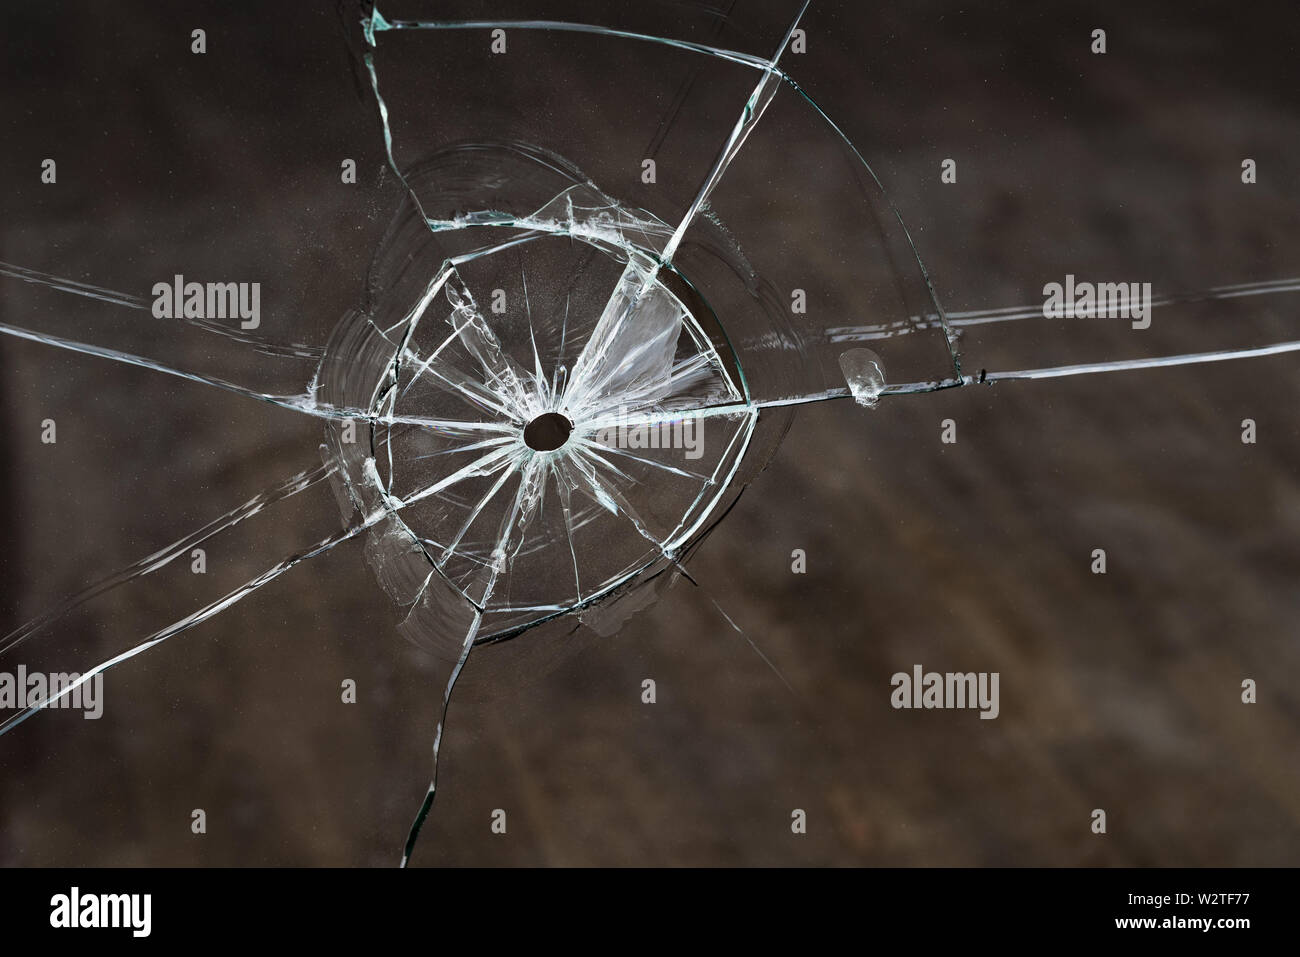 Trace from the bullet after the shot. Broken glass with cracks. Concept for design Stock Photo